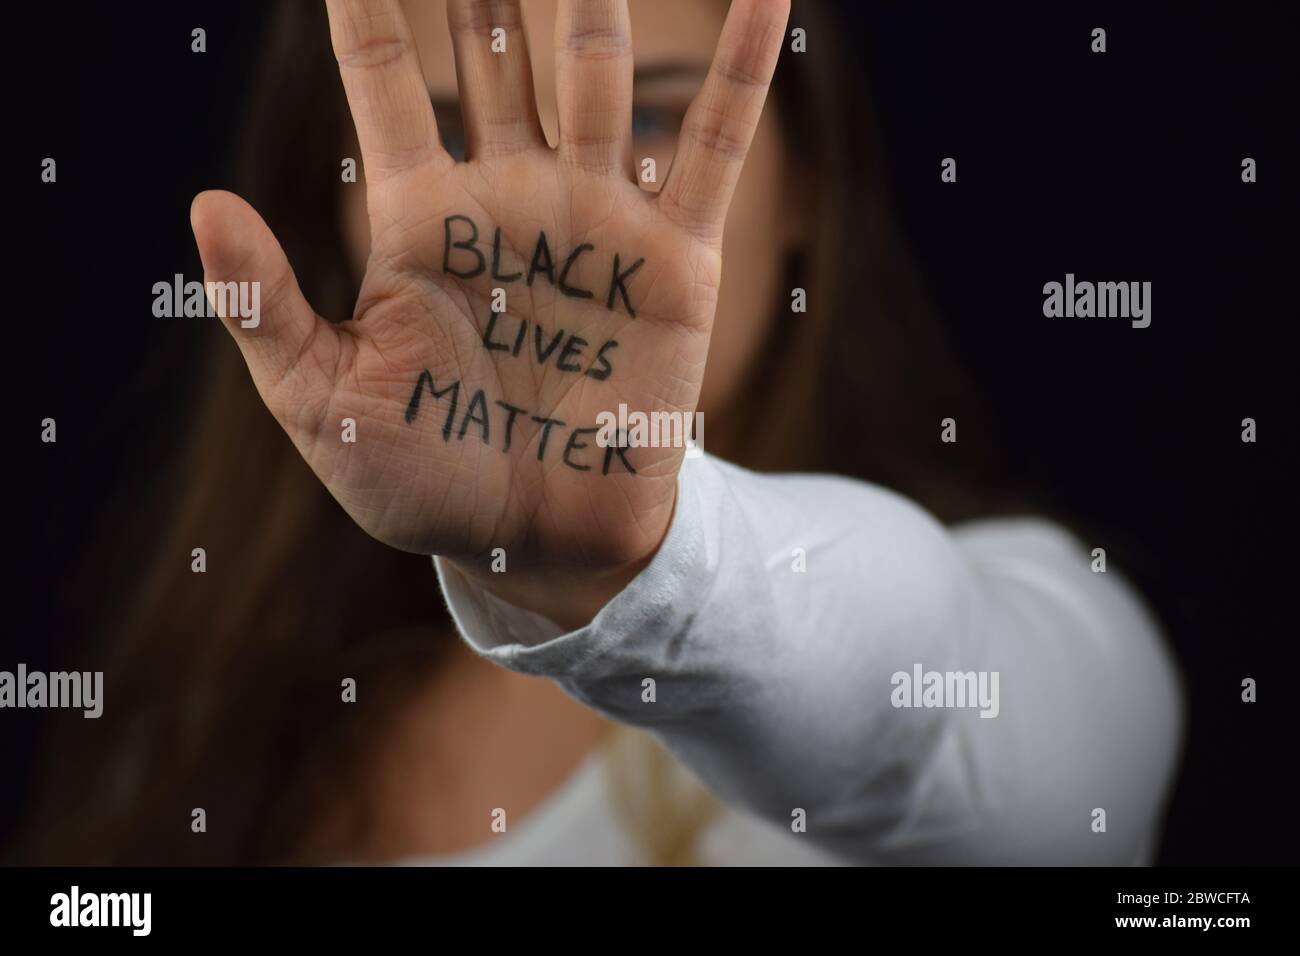 Caucasien woman holding her palm with text Black Lives Matter in support of peaceful protests against police brutality and racism Stock Photo